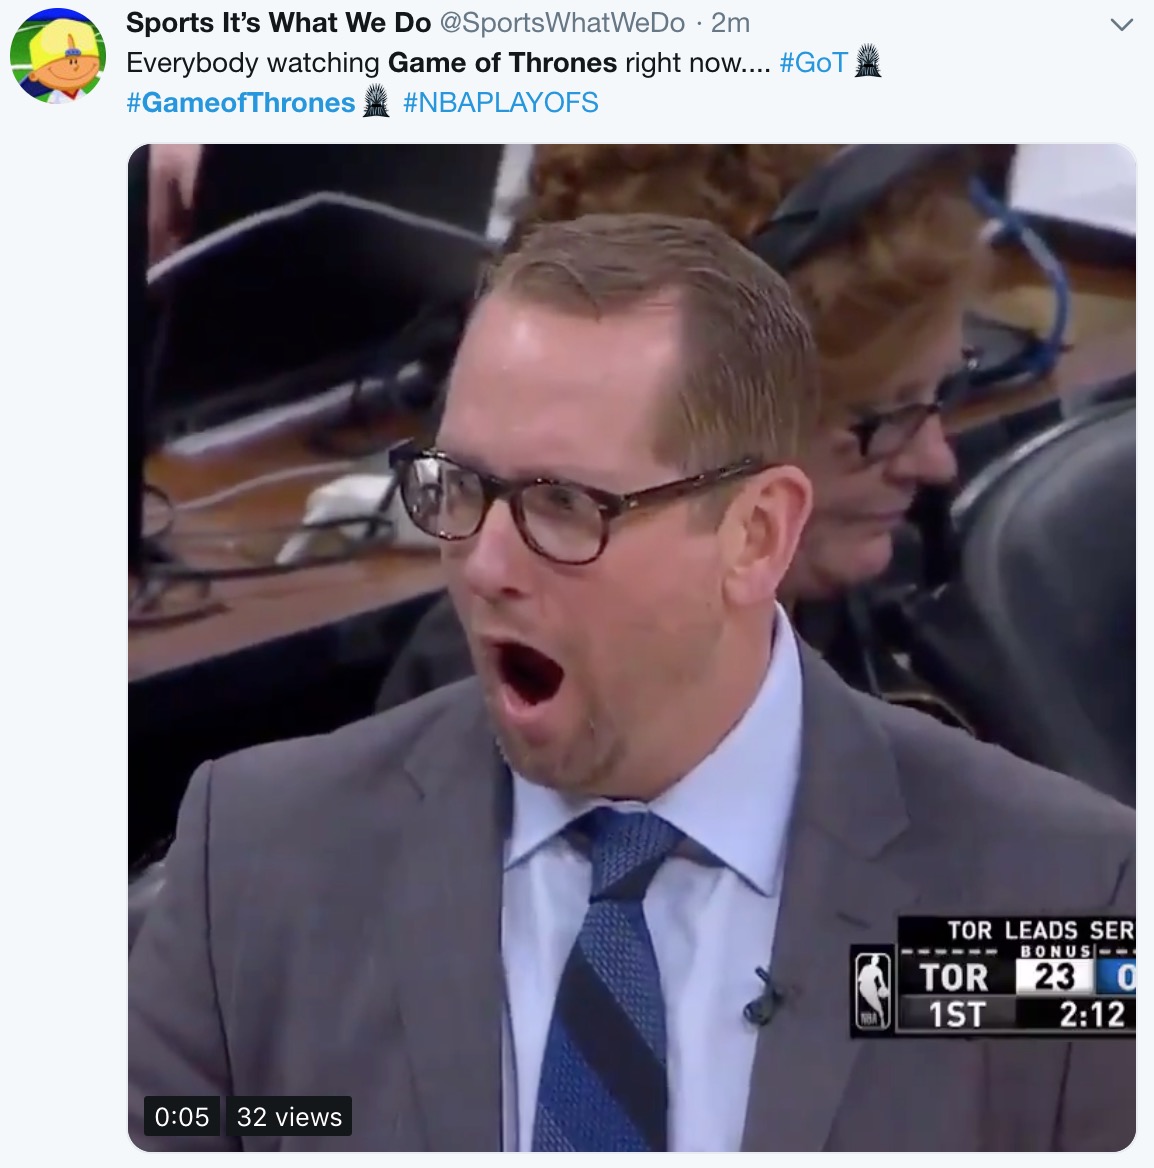 game of thrones final episode meme - Nick Nurse - Sports It's What We Do 2m Everybody watching Game of Thrones right now.... Tor Leads Ser Bonus Tor 23 1ST N 32 views